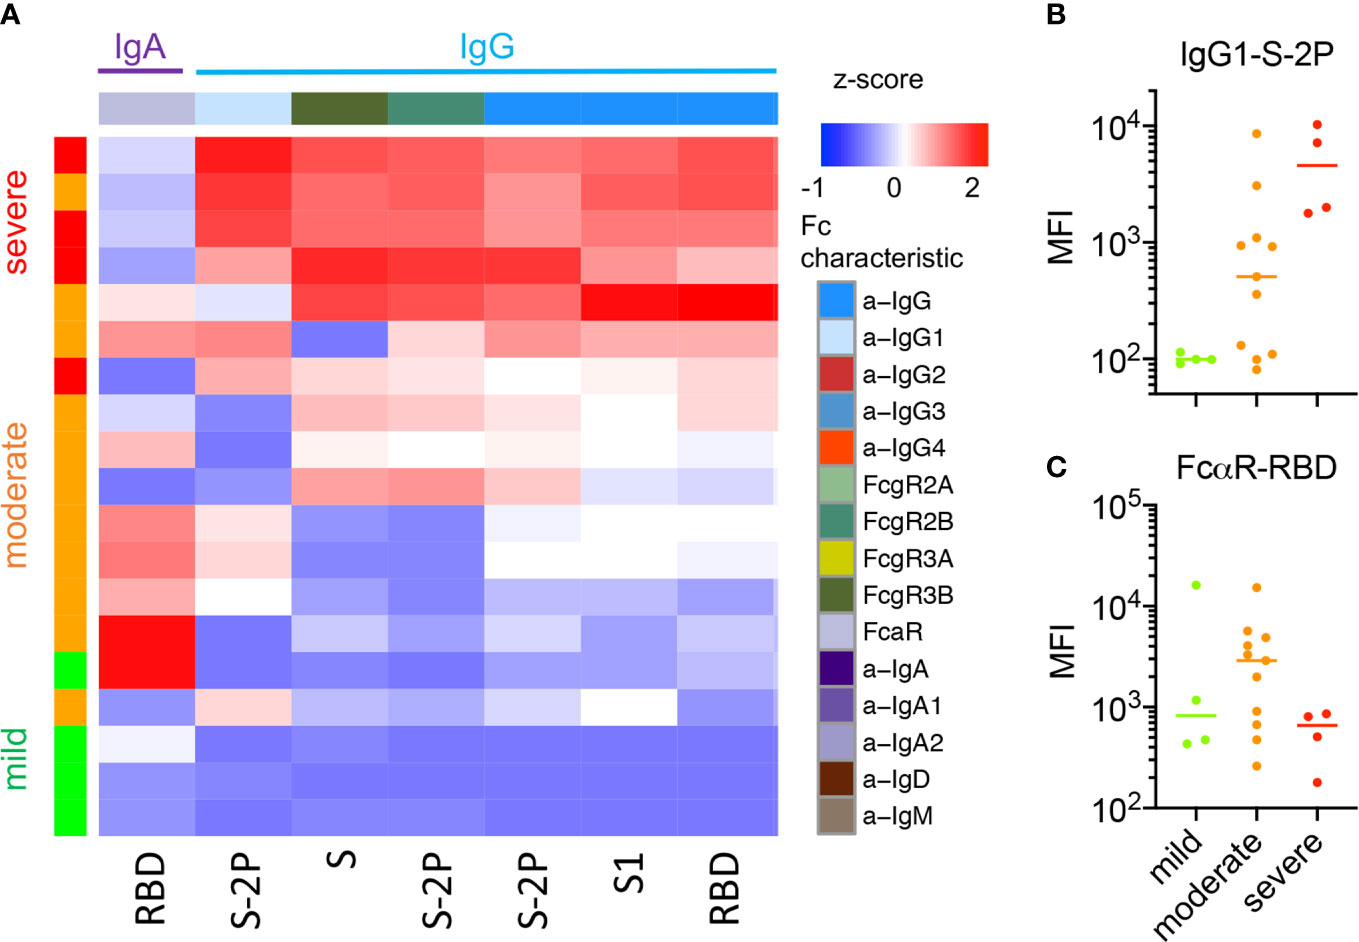 Frontiers  C500 variants conveying complete mucosal immunity